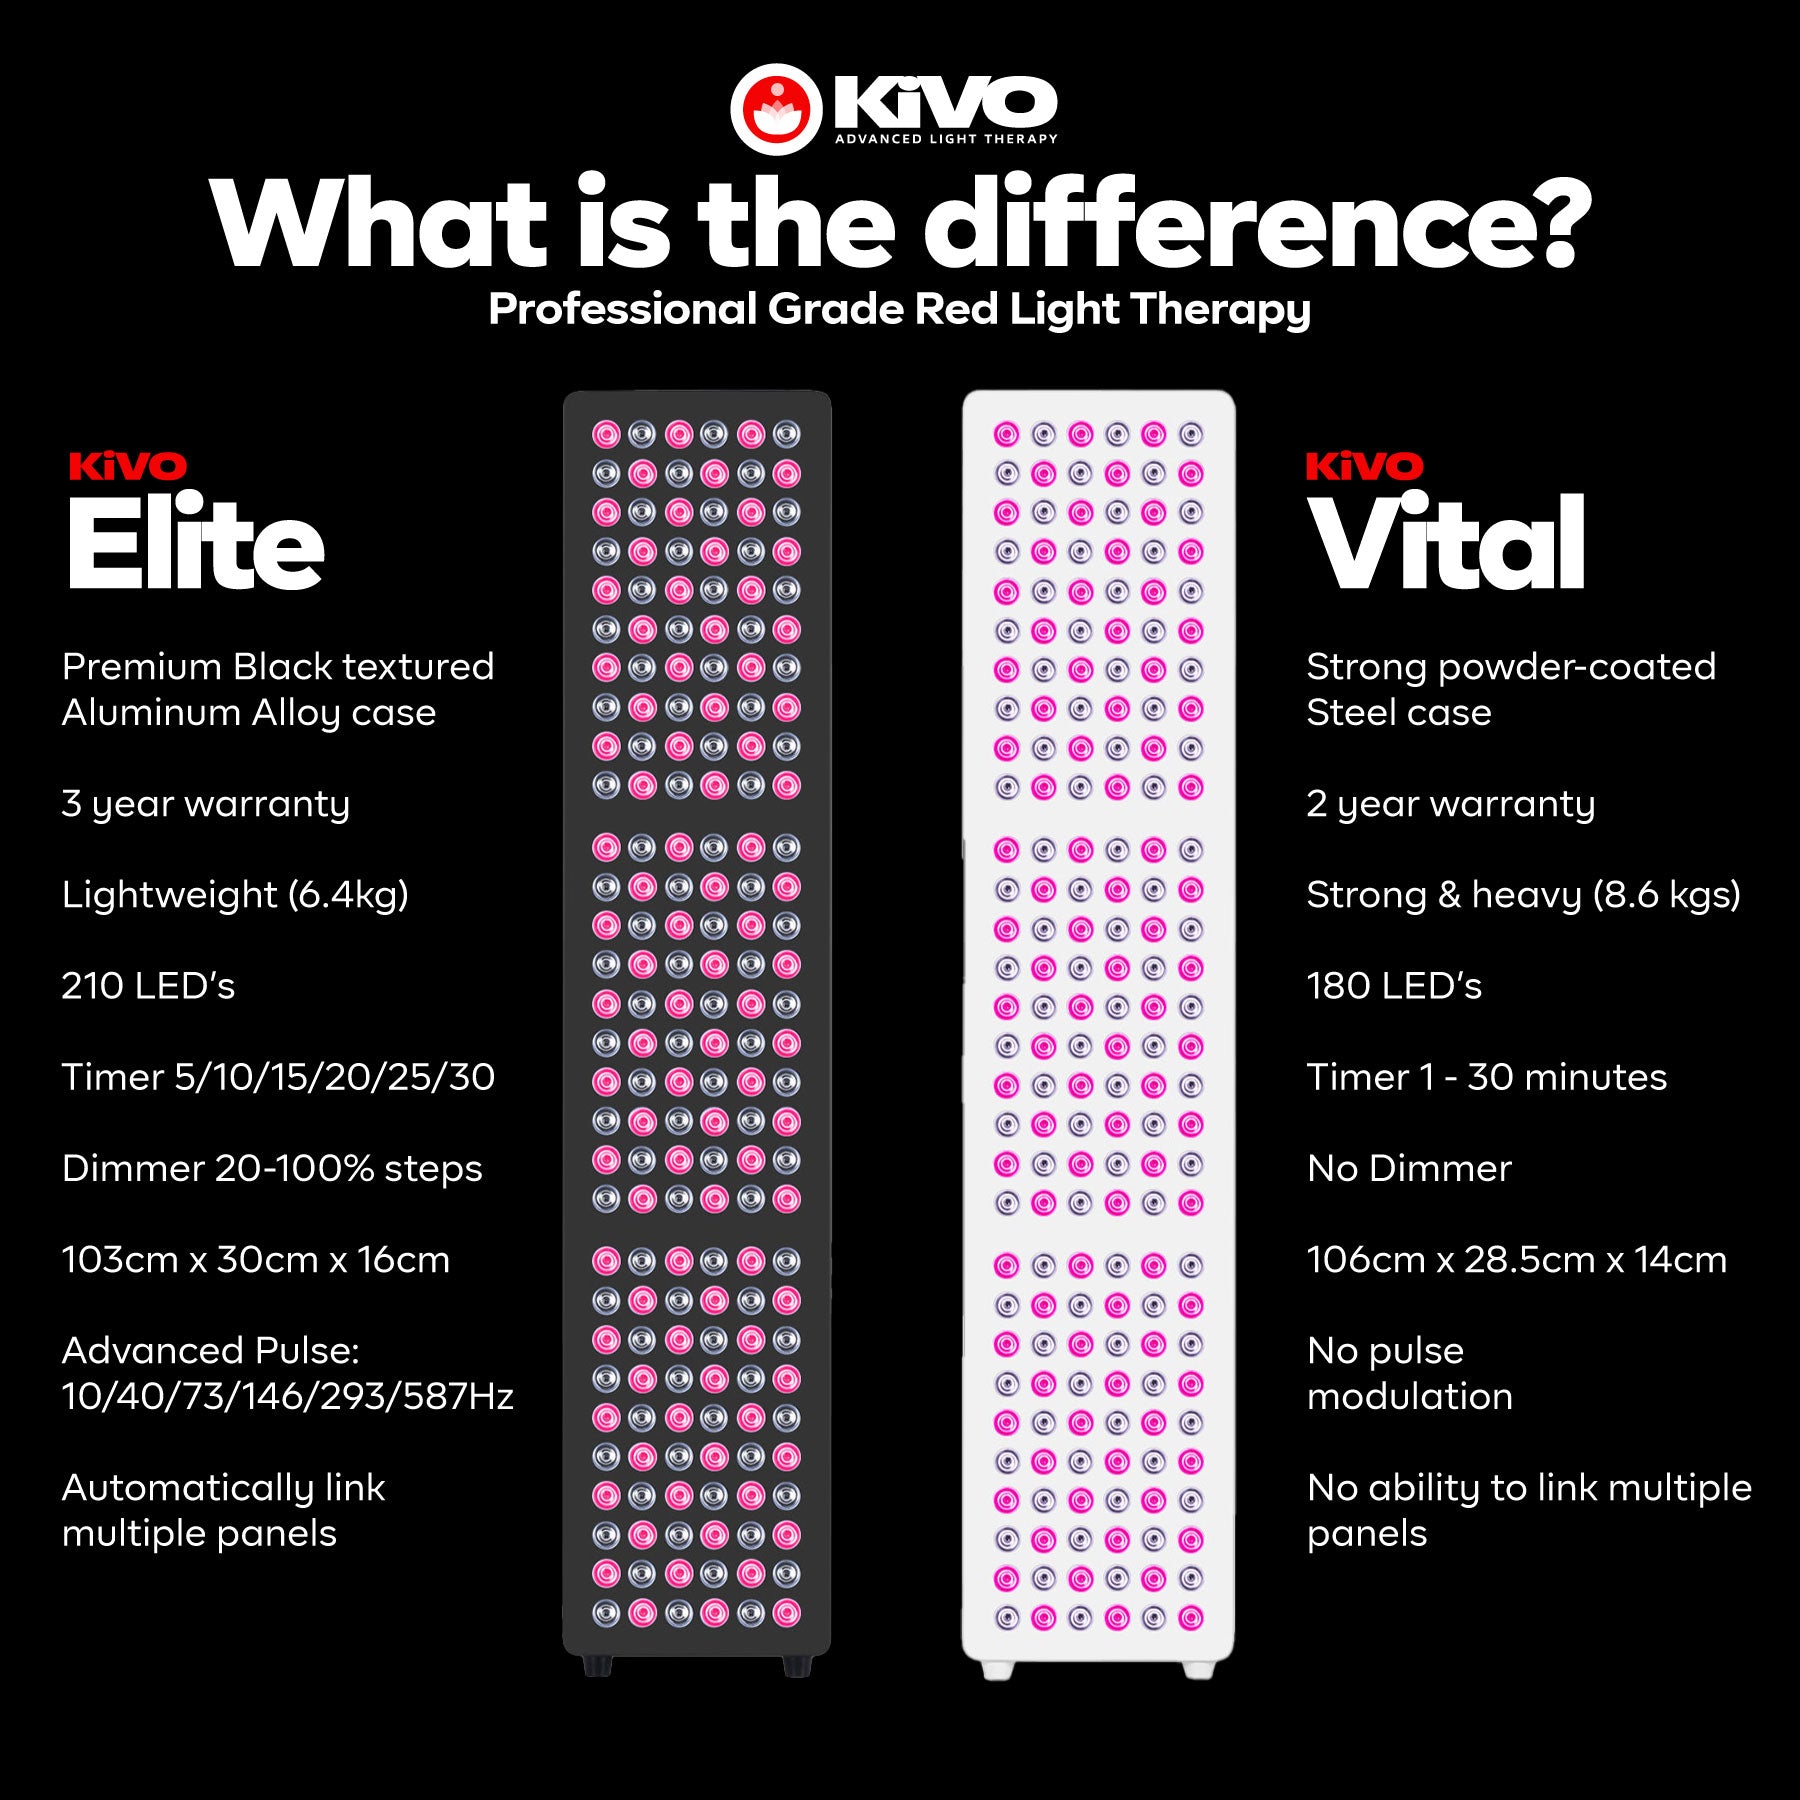 Difference between Elite and Vital